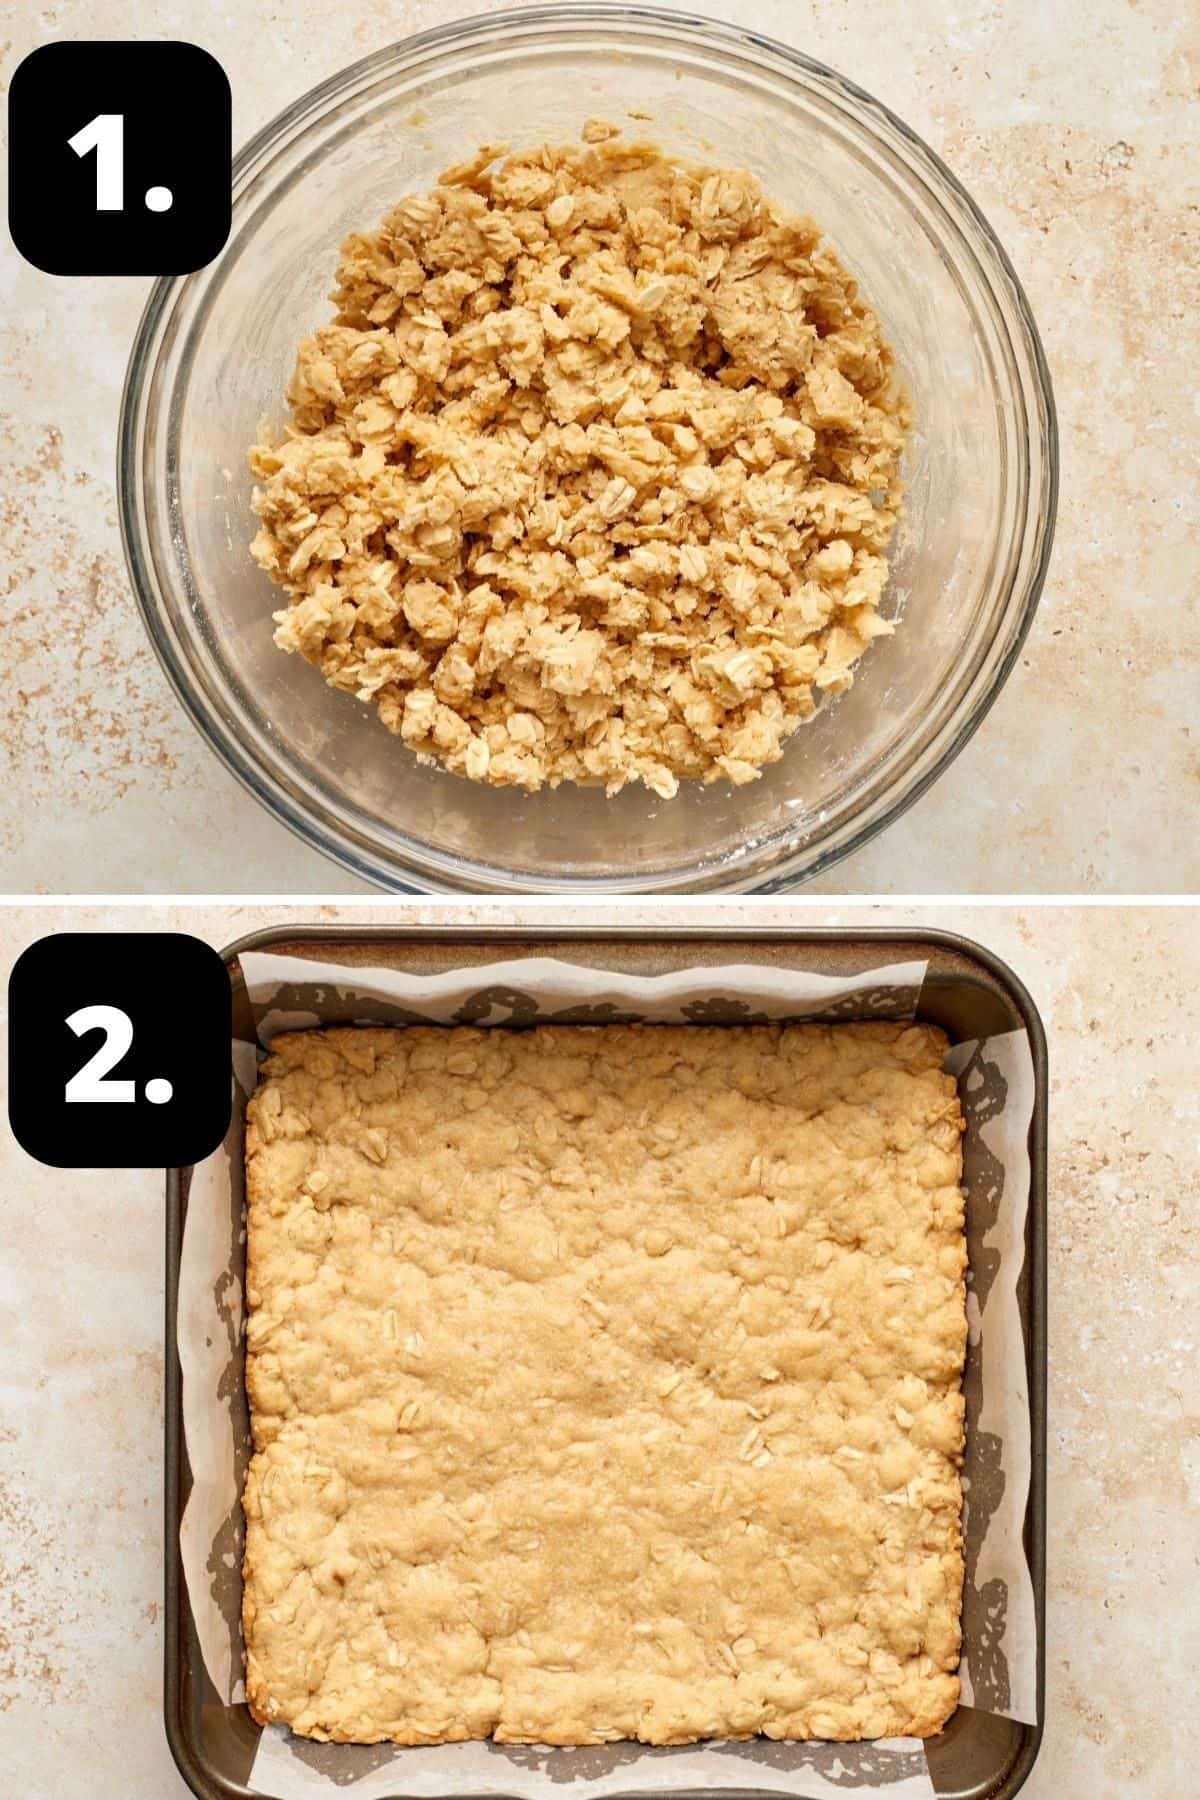 Steps 1-2 of preparing this recipe: preparing the base/topping mixture in a glass bowl and the cooked base in the tin.